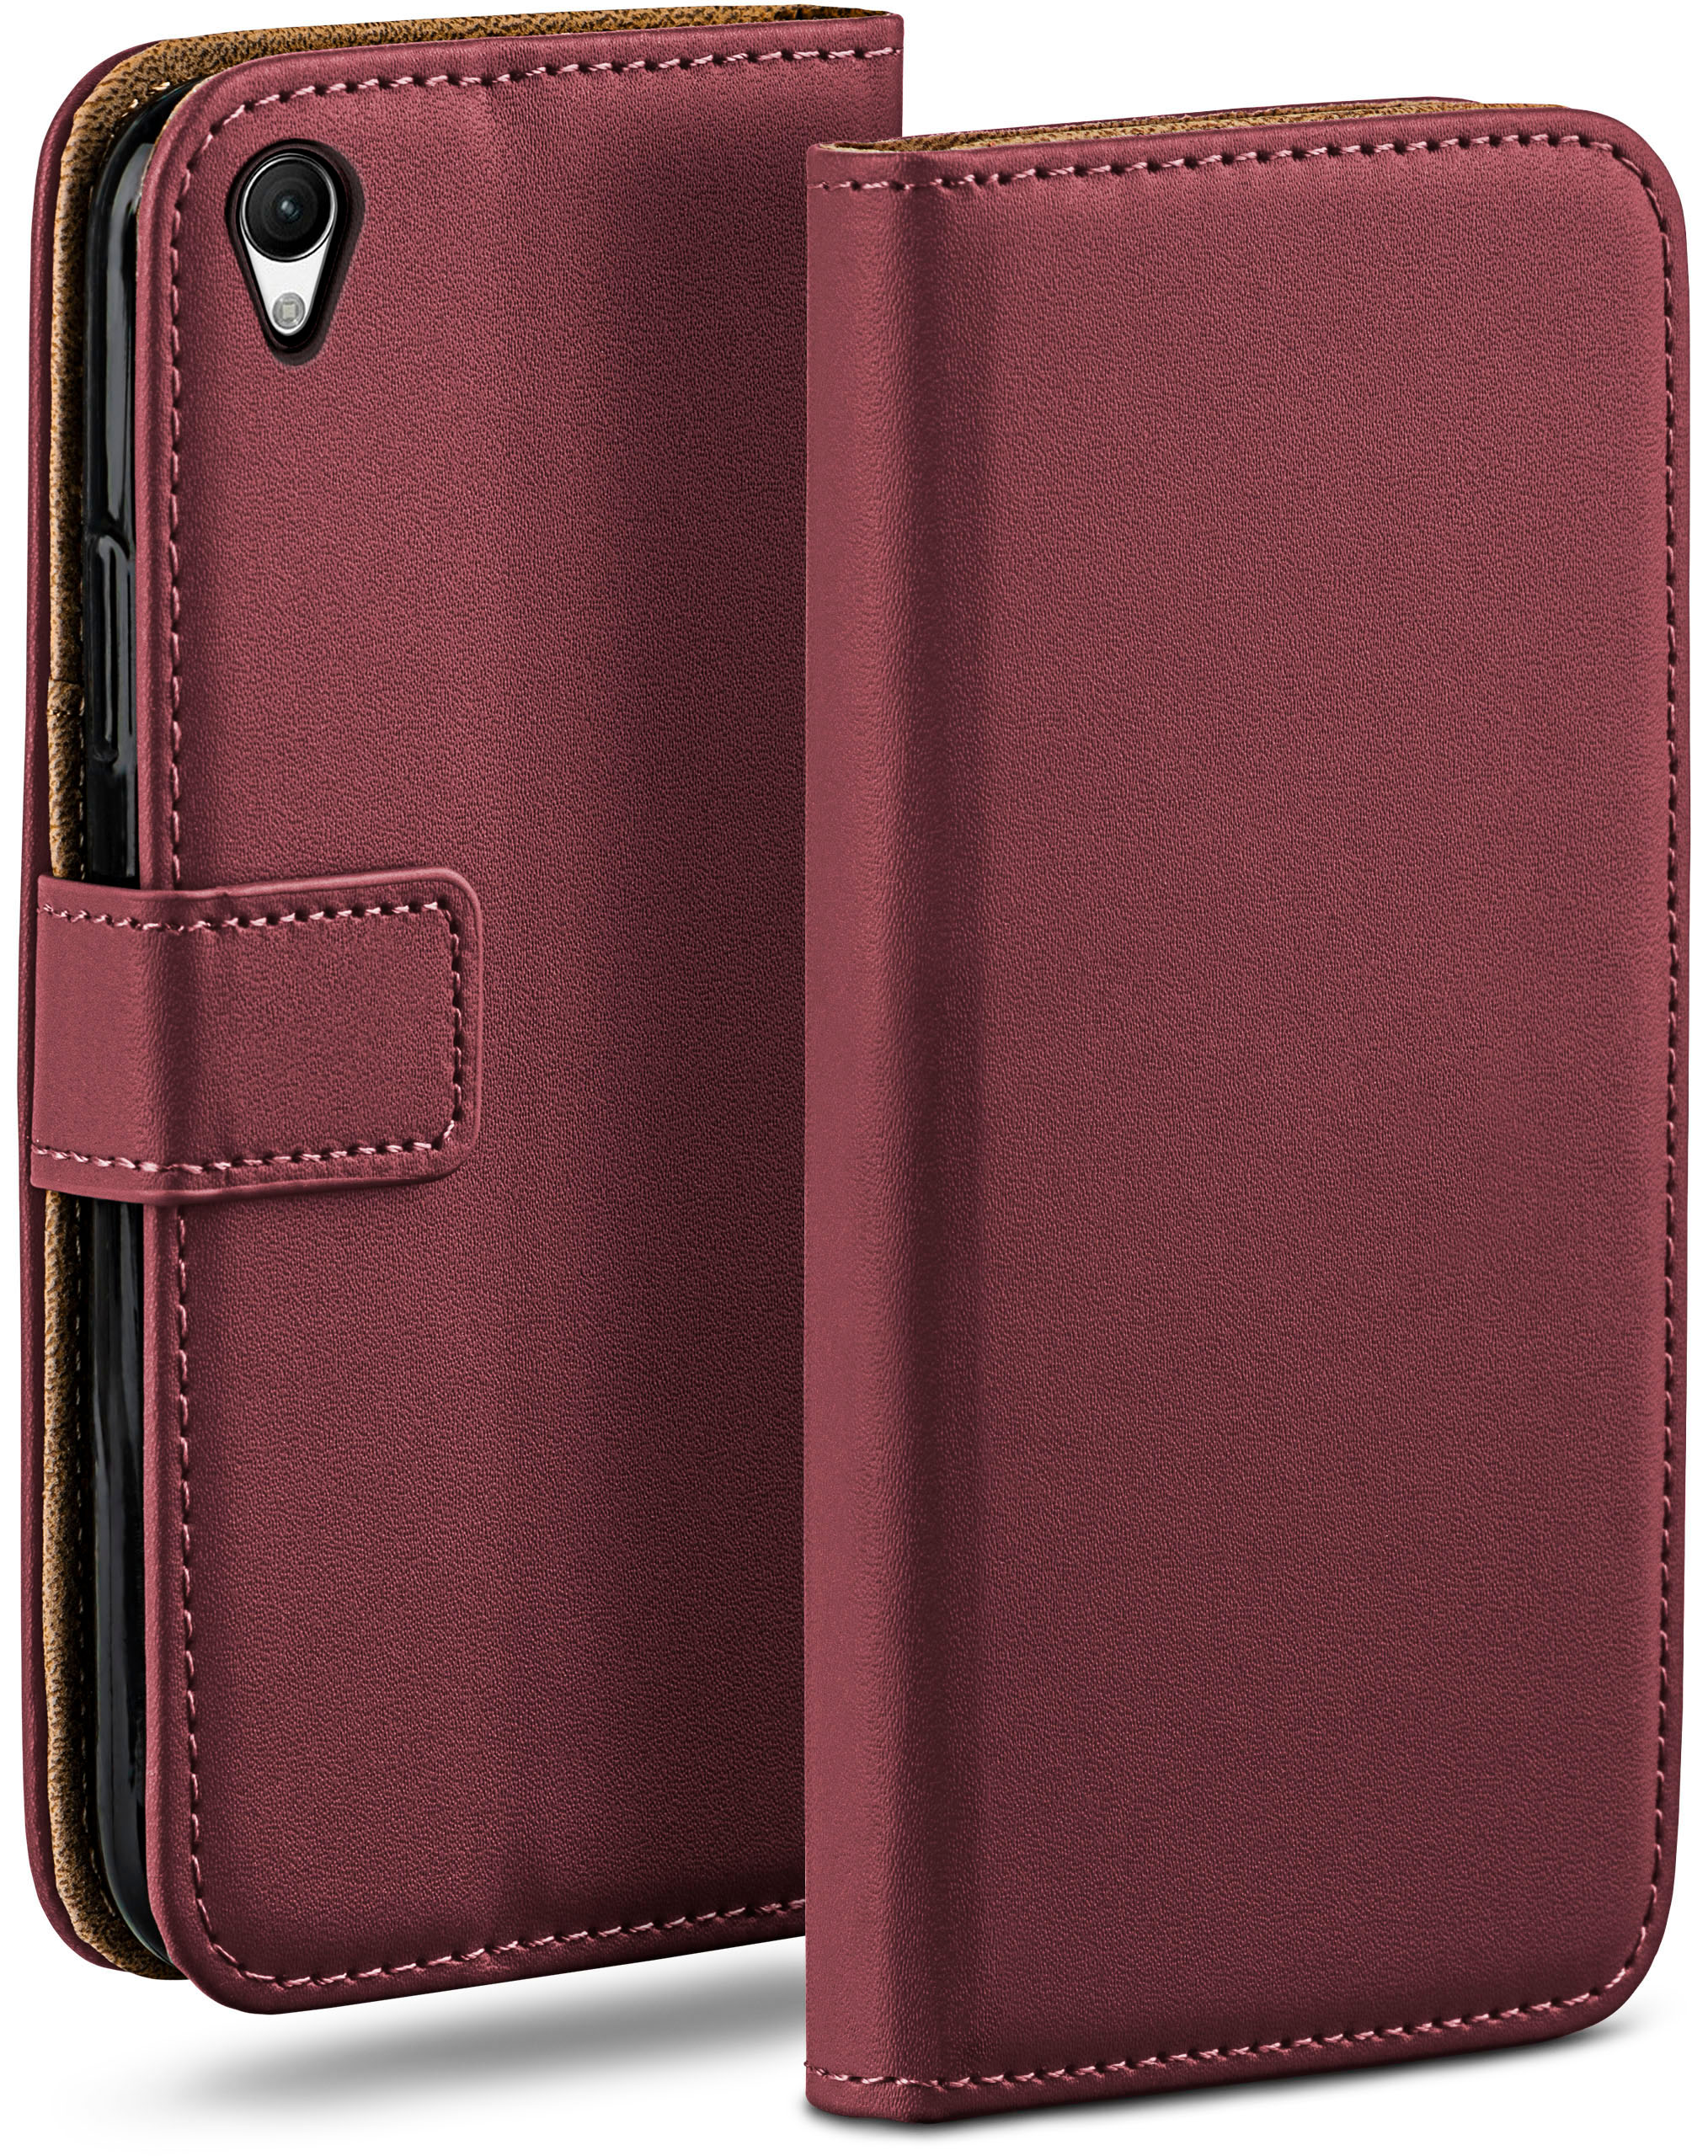 MOEX Book Z3, Bookcover, Sony, Maroon-Red Case, Xperia